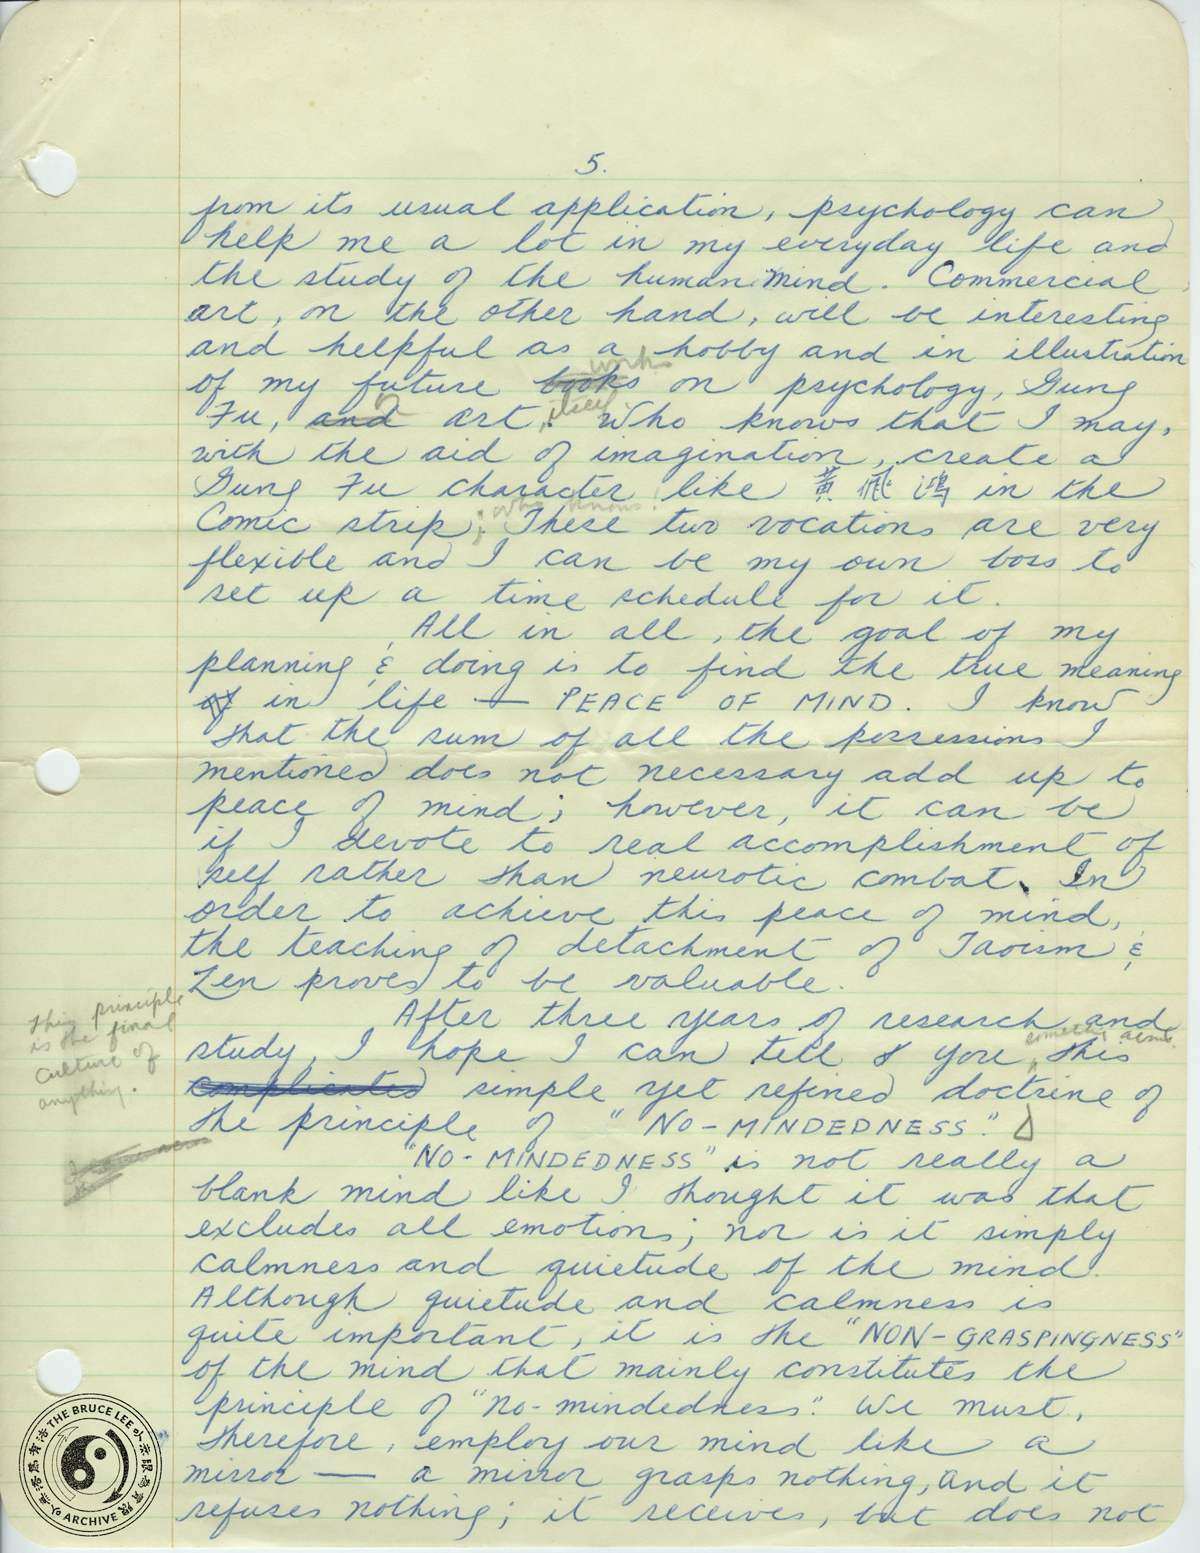 Letter-to-Pearl-draft-pg.5-archive.jpg